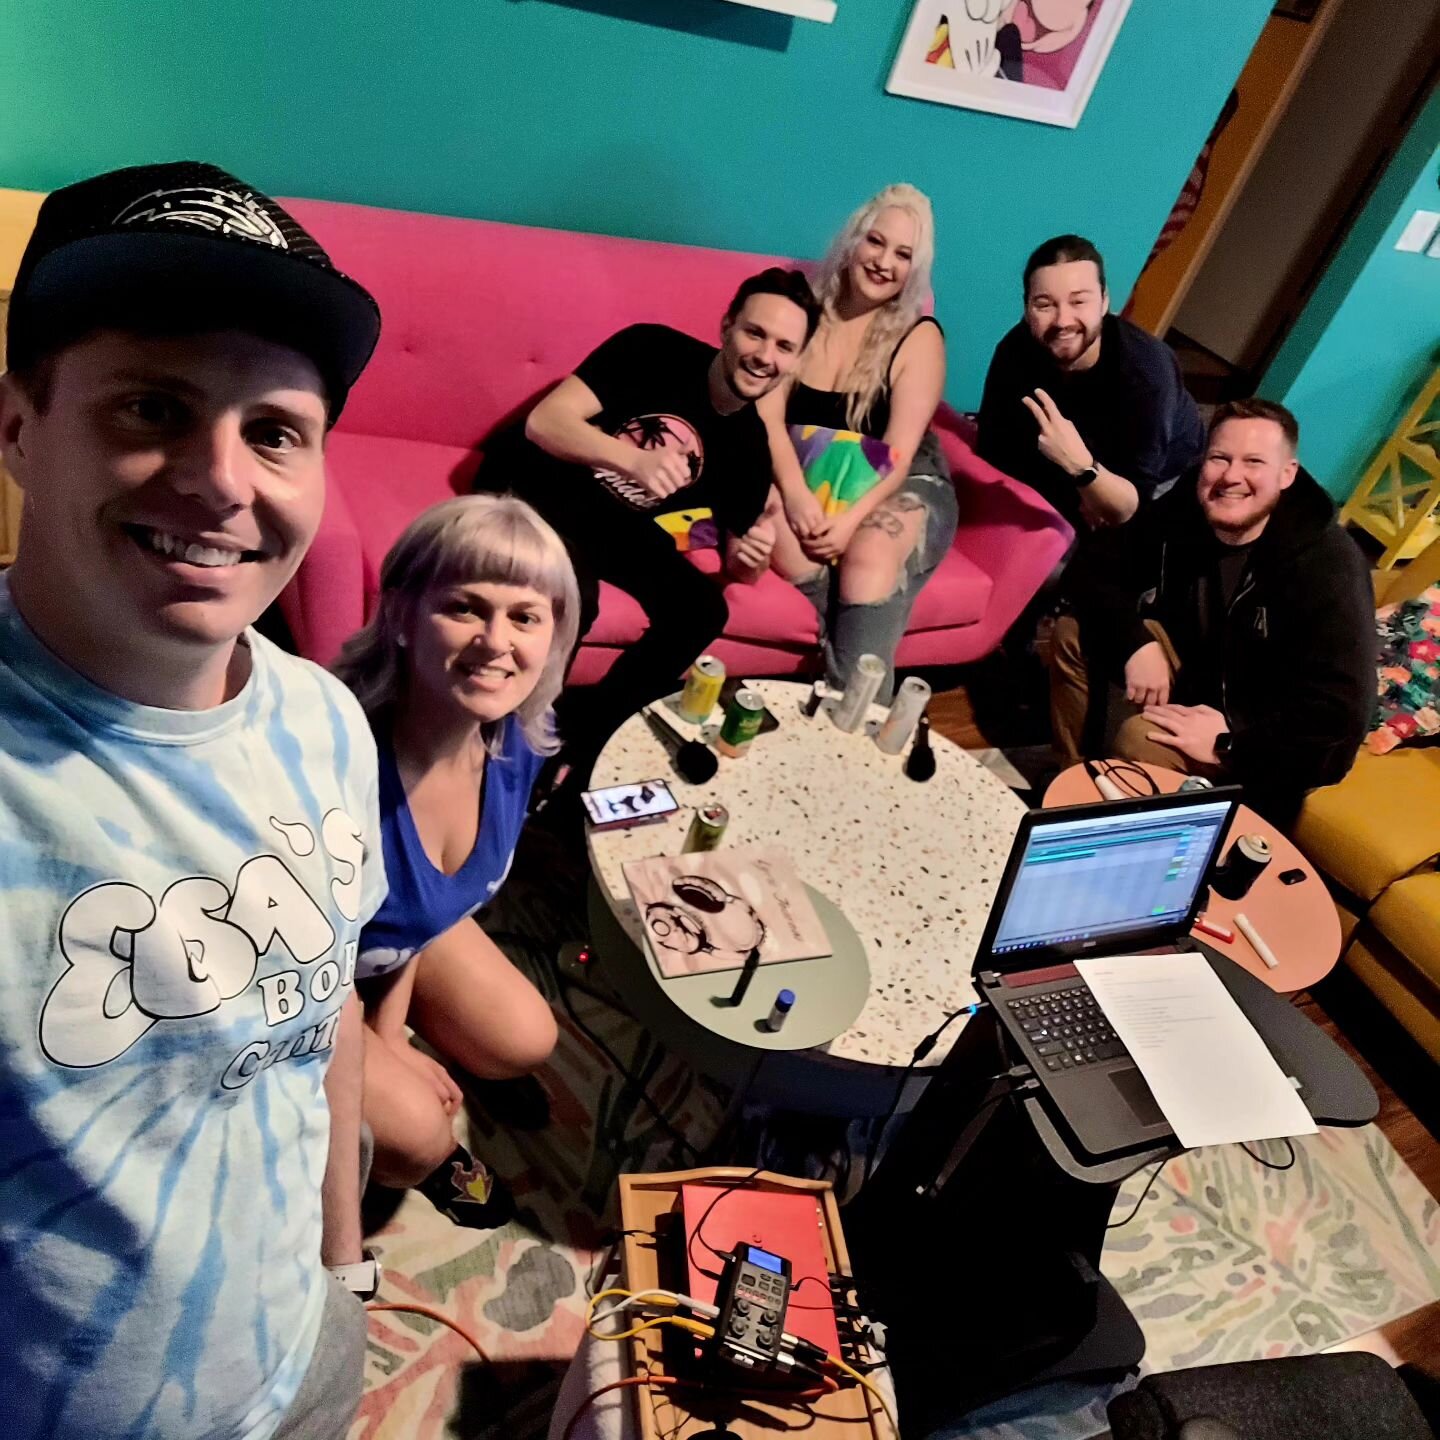 We had the best time recording ep 284 with this group on Saturday, check it out! Afterparty dropping later today on Patreon!